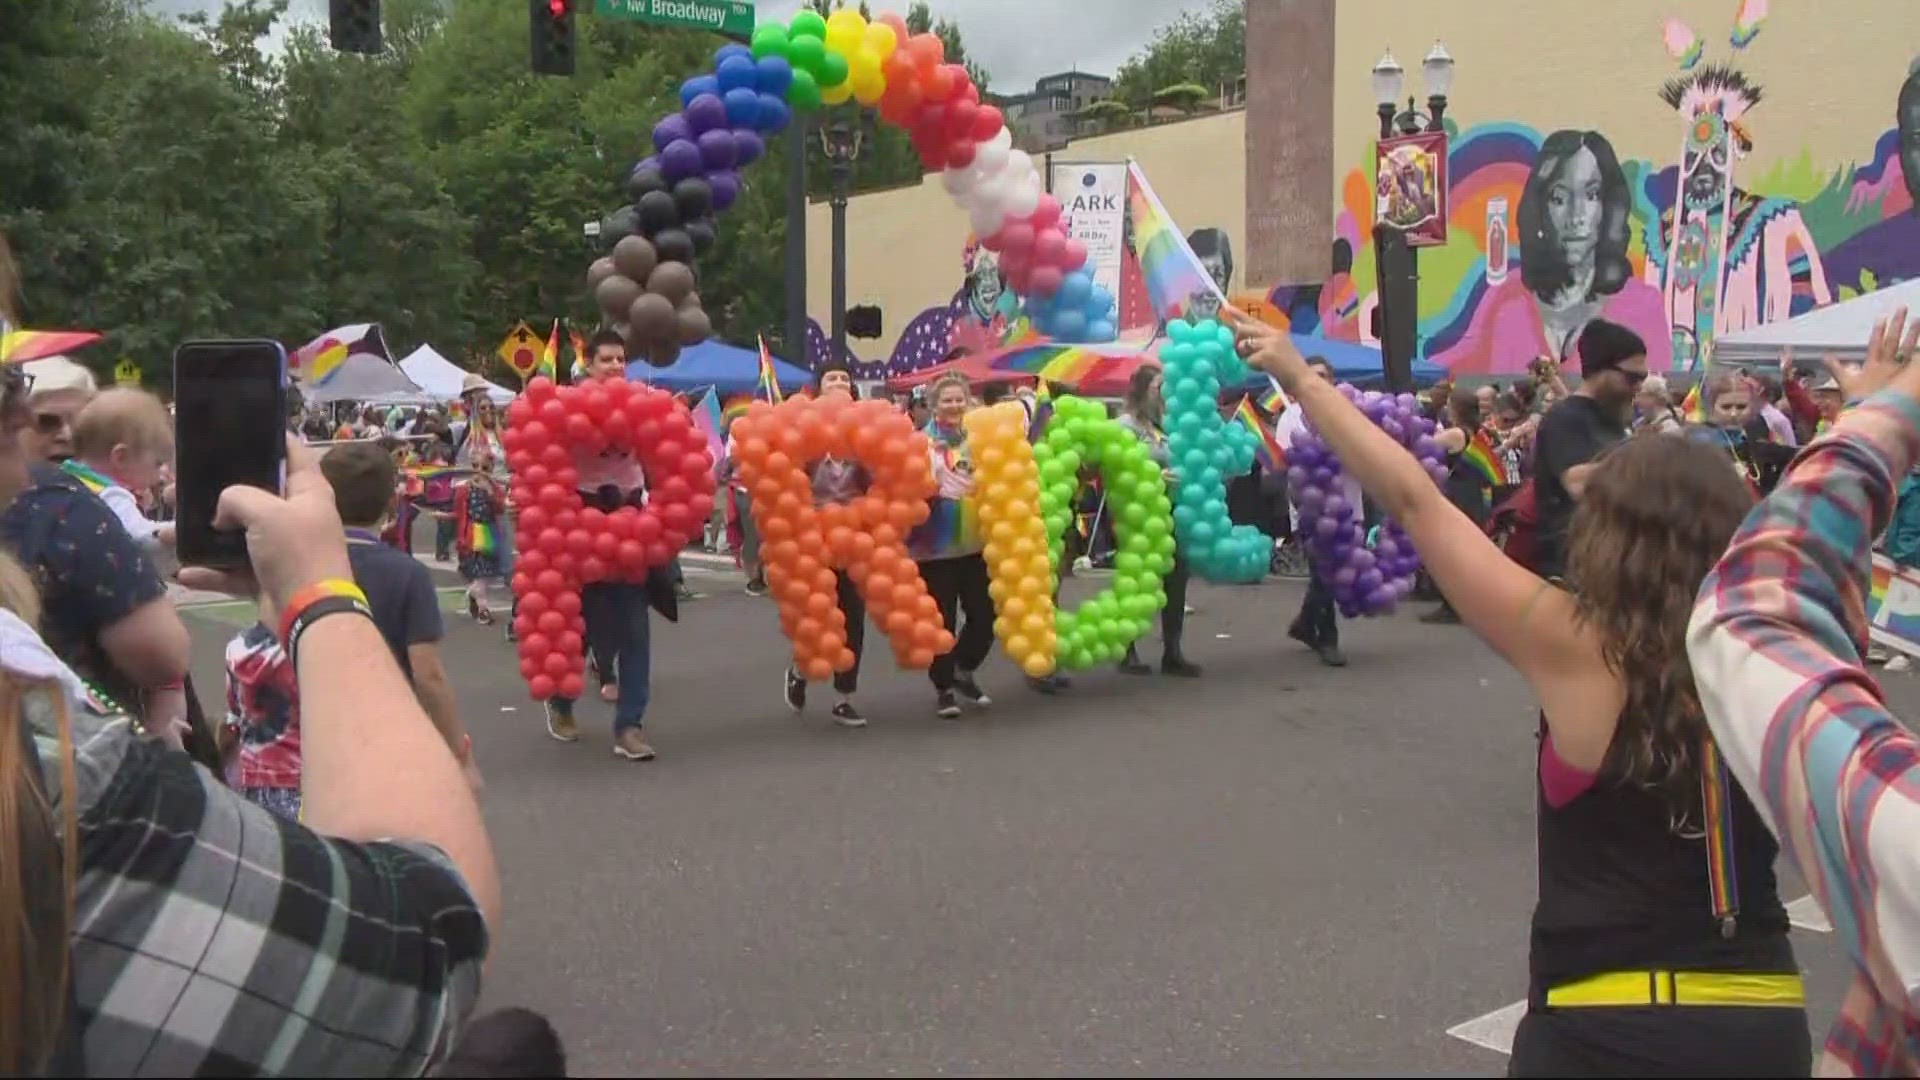 June is Pride Month and for many, it means celebrating visibility and equality for LGBTQ+ communities. Here's some of the events happening in the Portland metro area